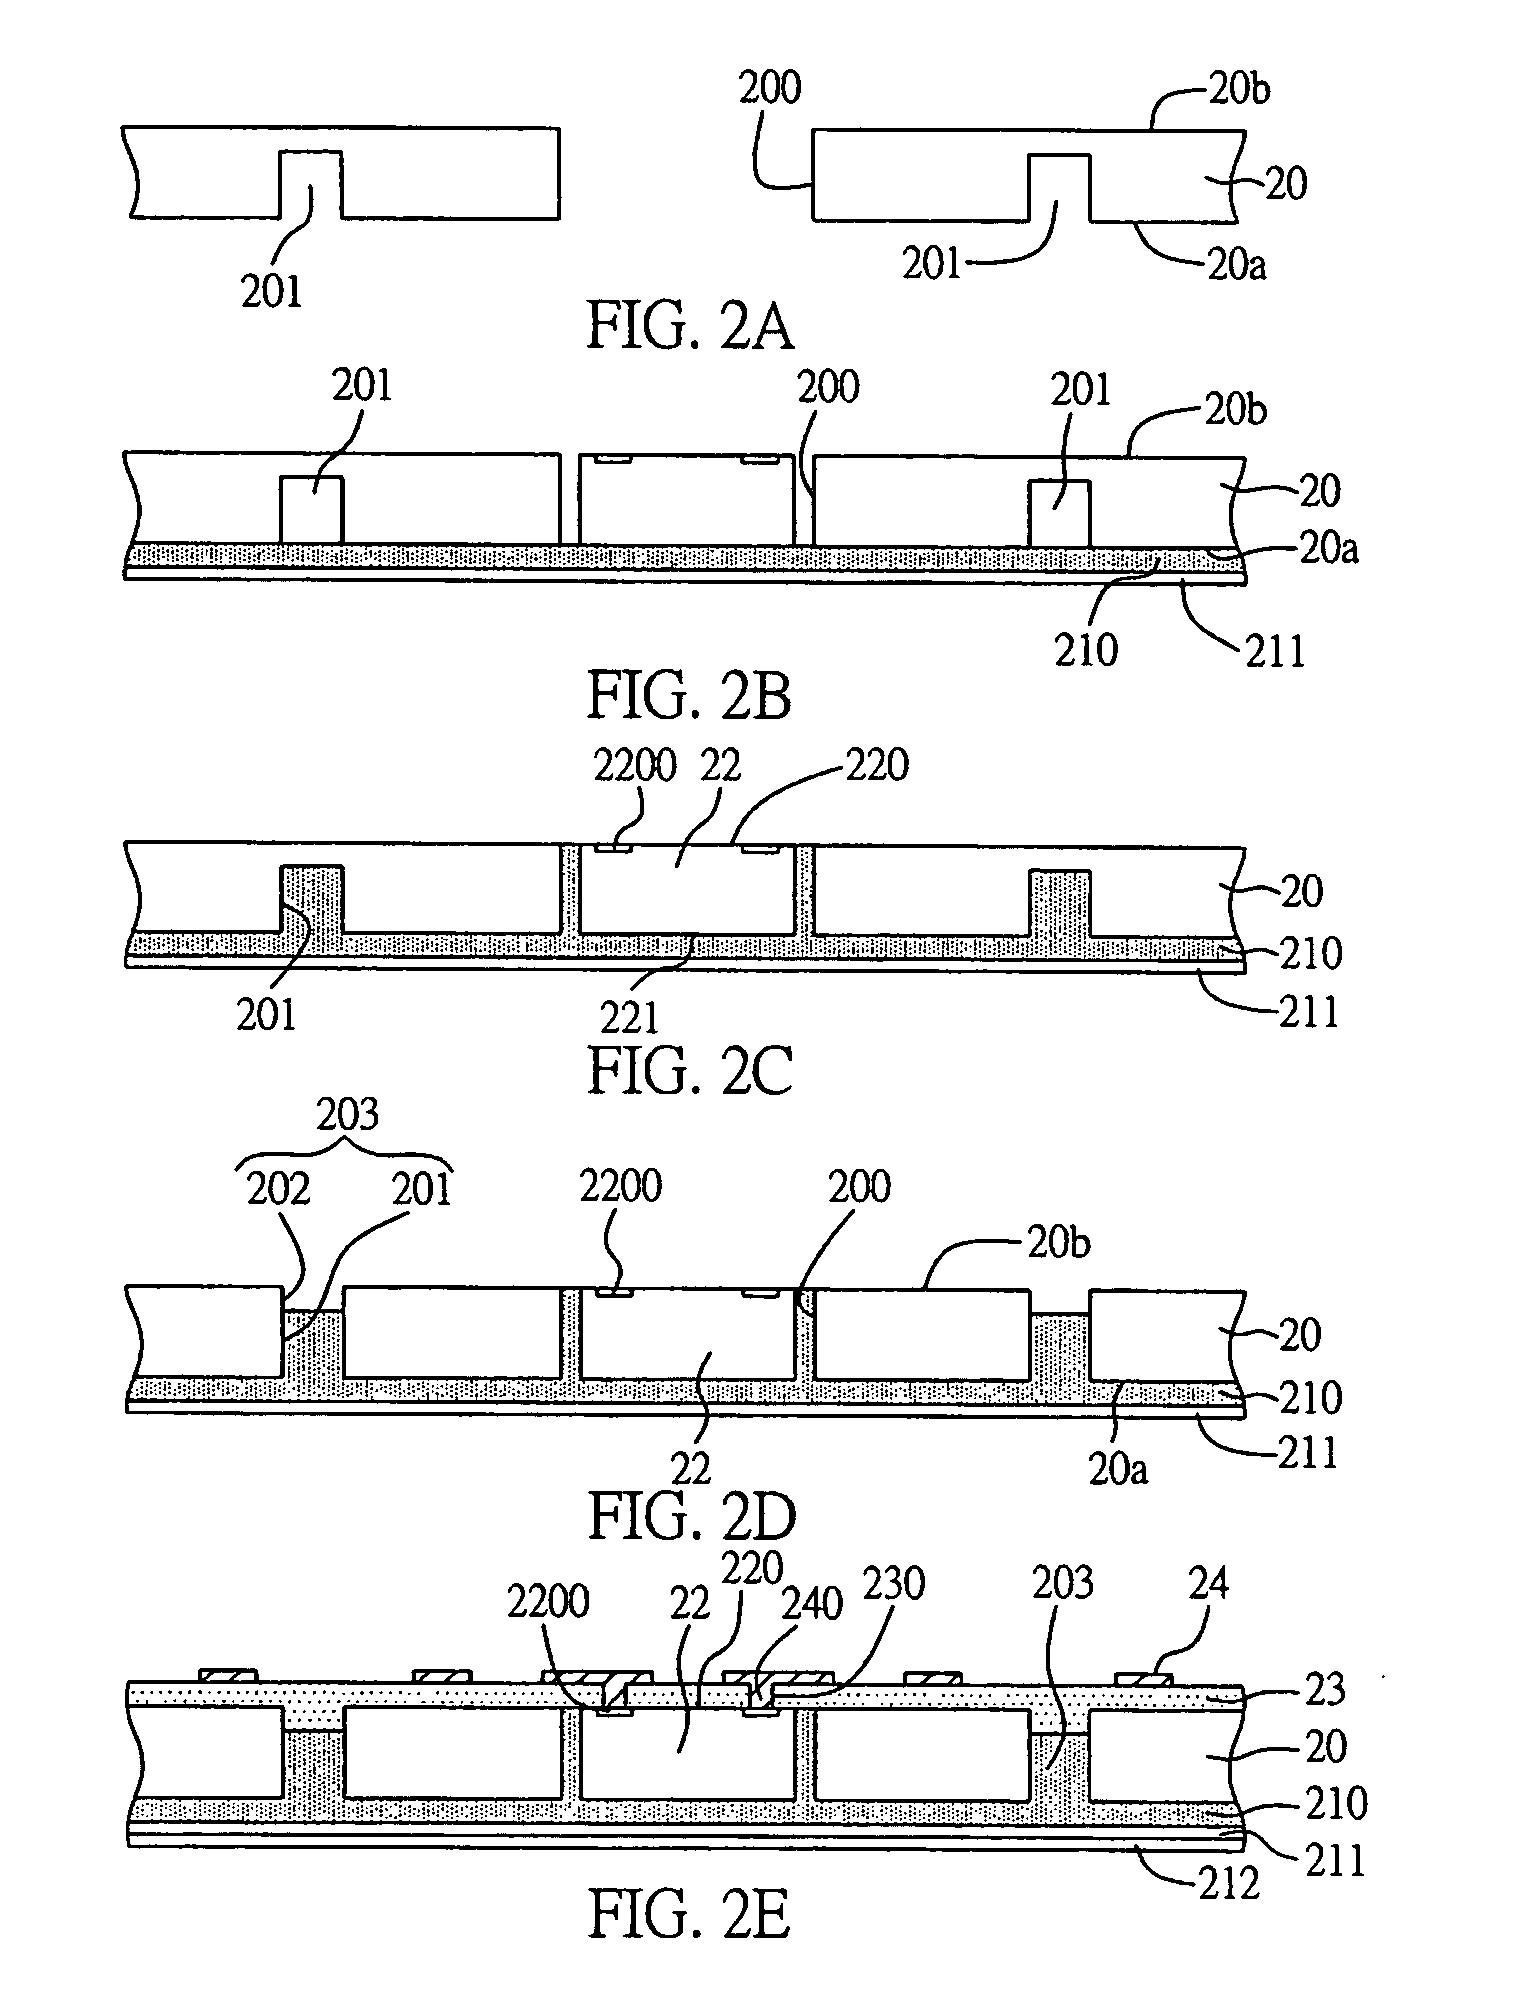 Structure with semiconductor chips embeded therein